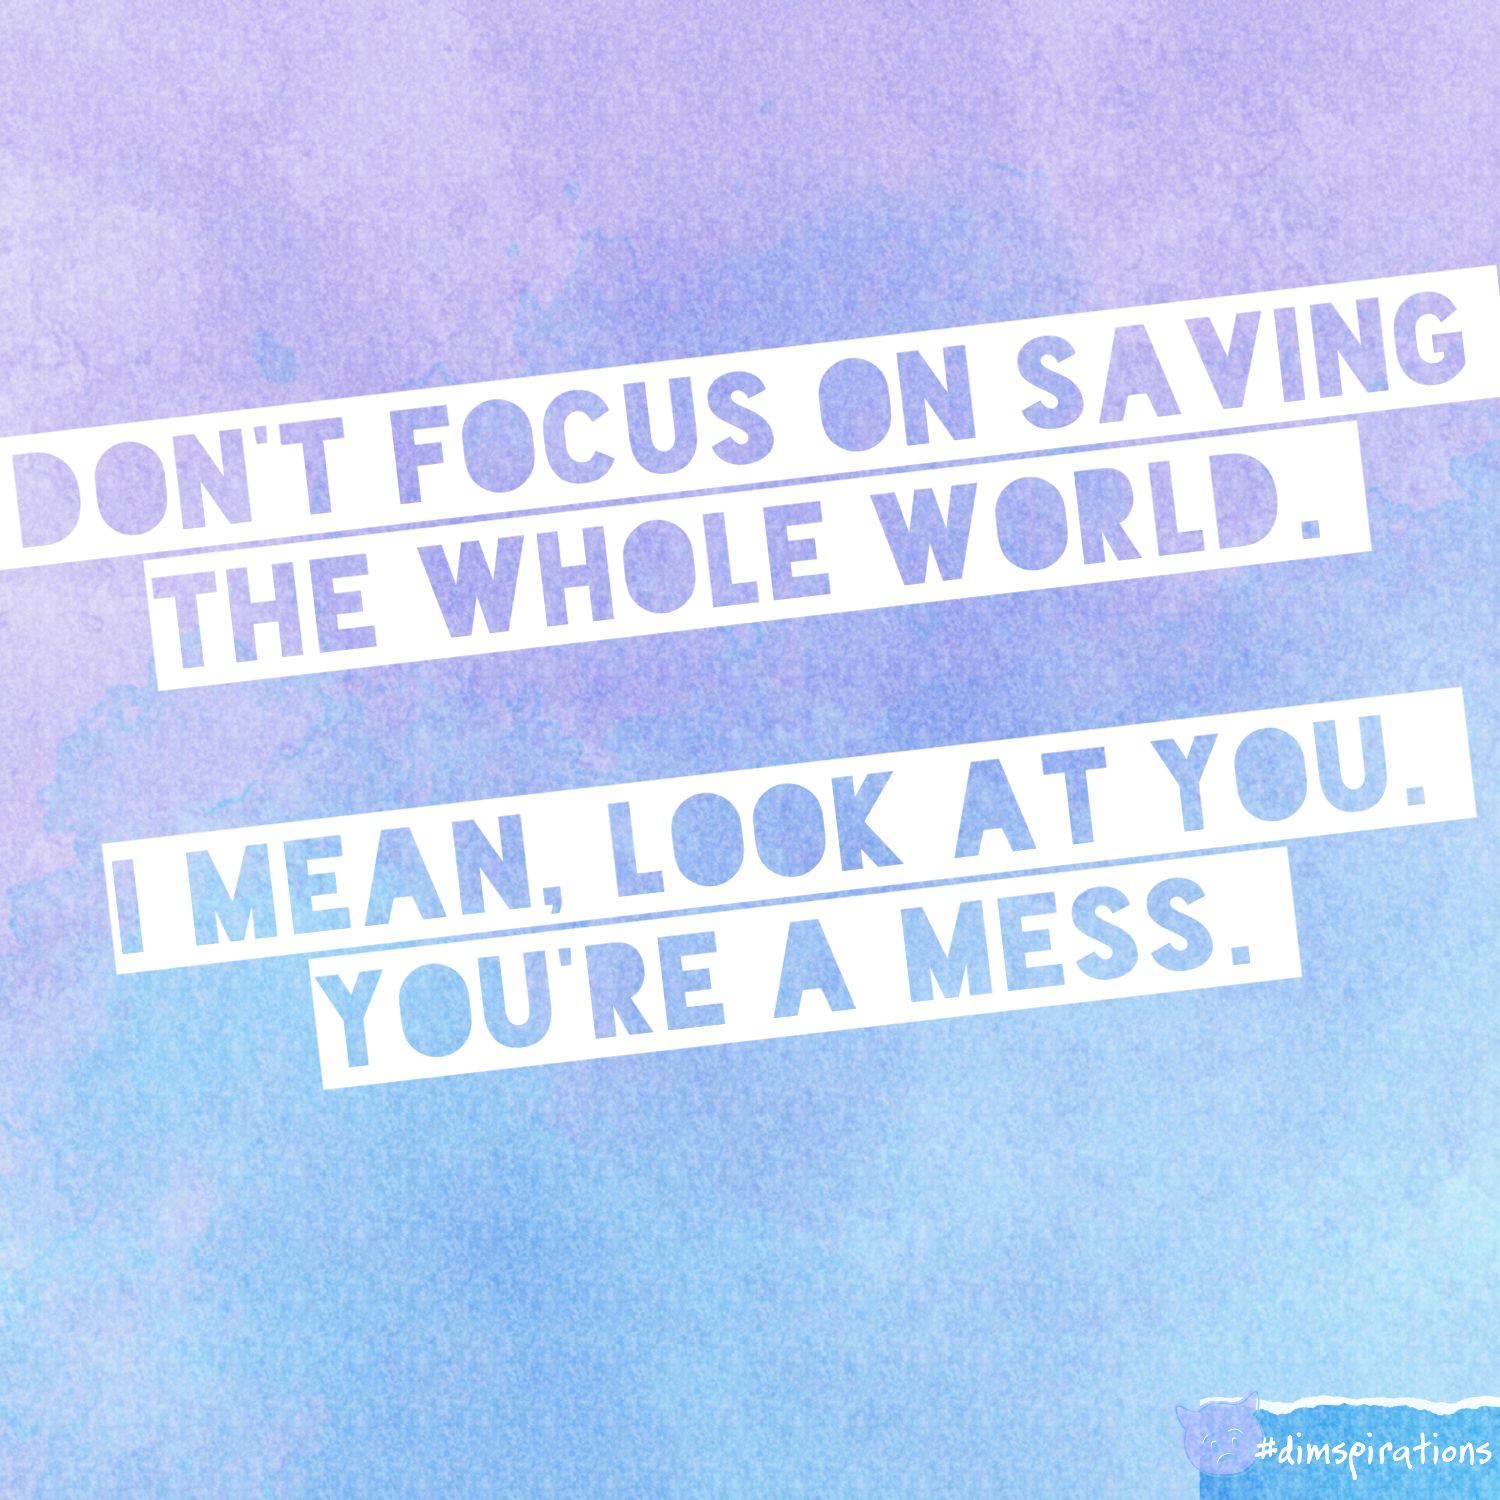 Don't focus on saving the world. I mean look at you. You're a mess.